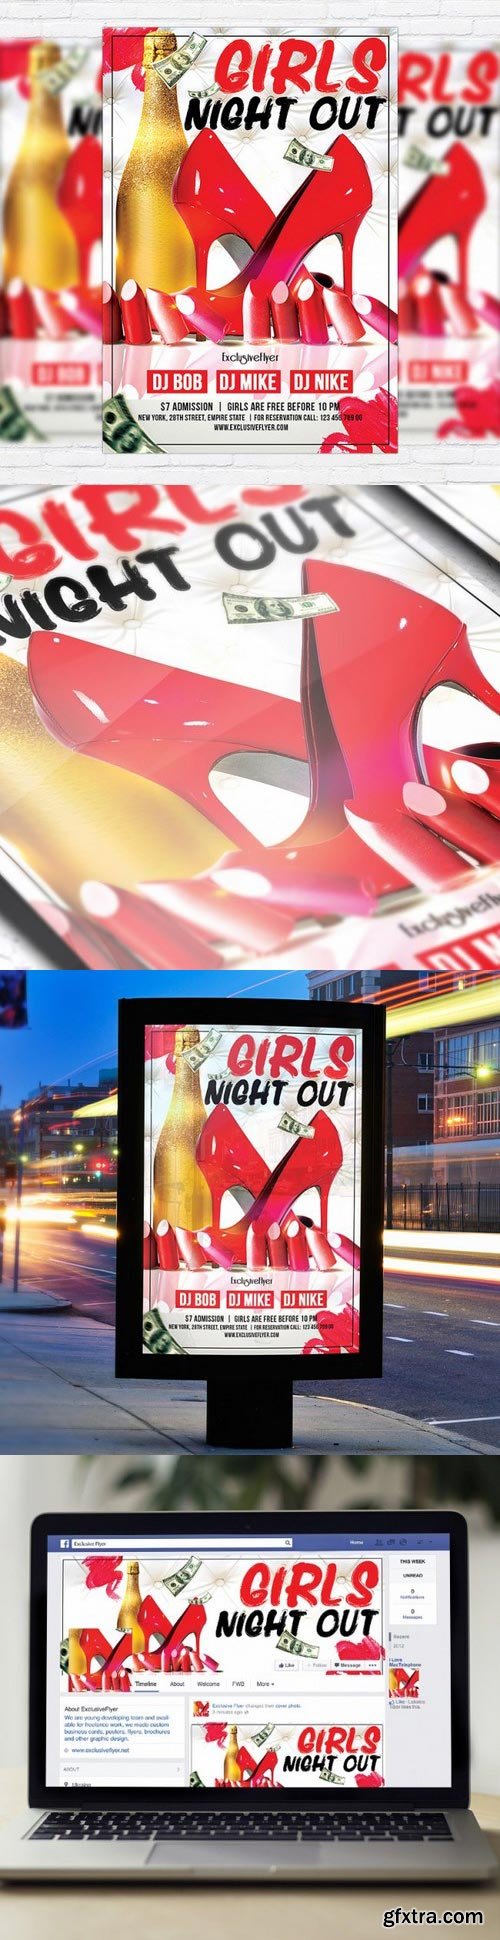 Girls Night Out Party Flyer PSD Template + Facebook Cover